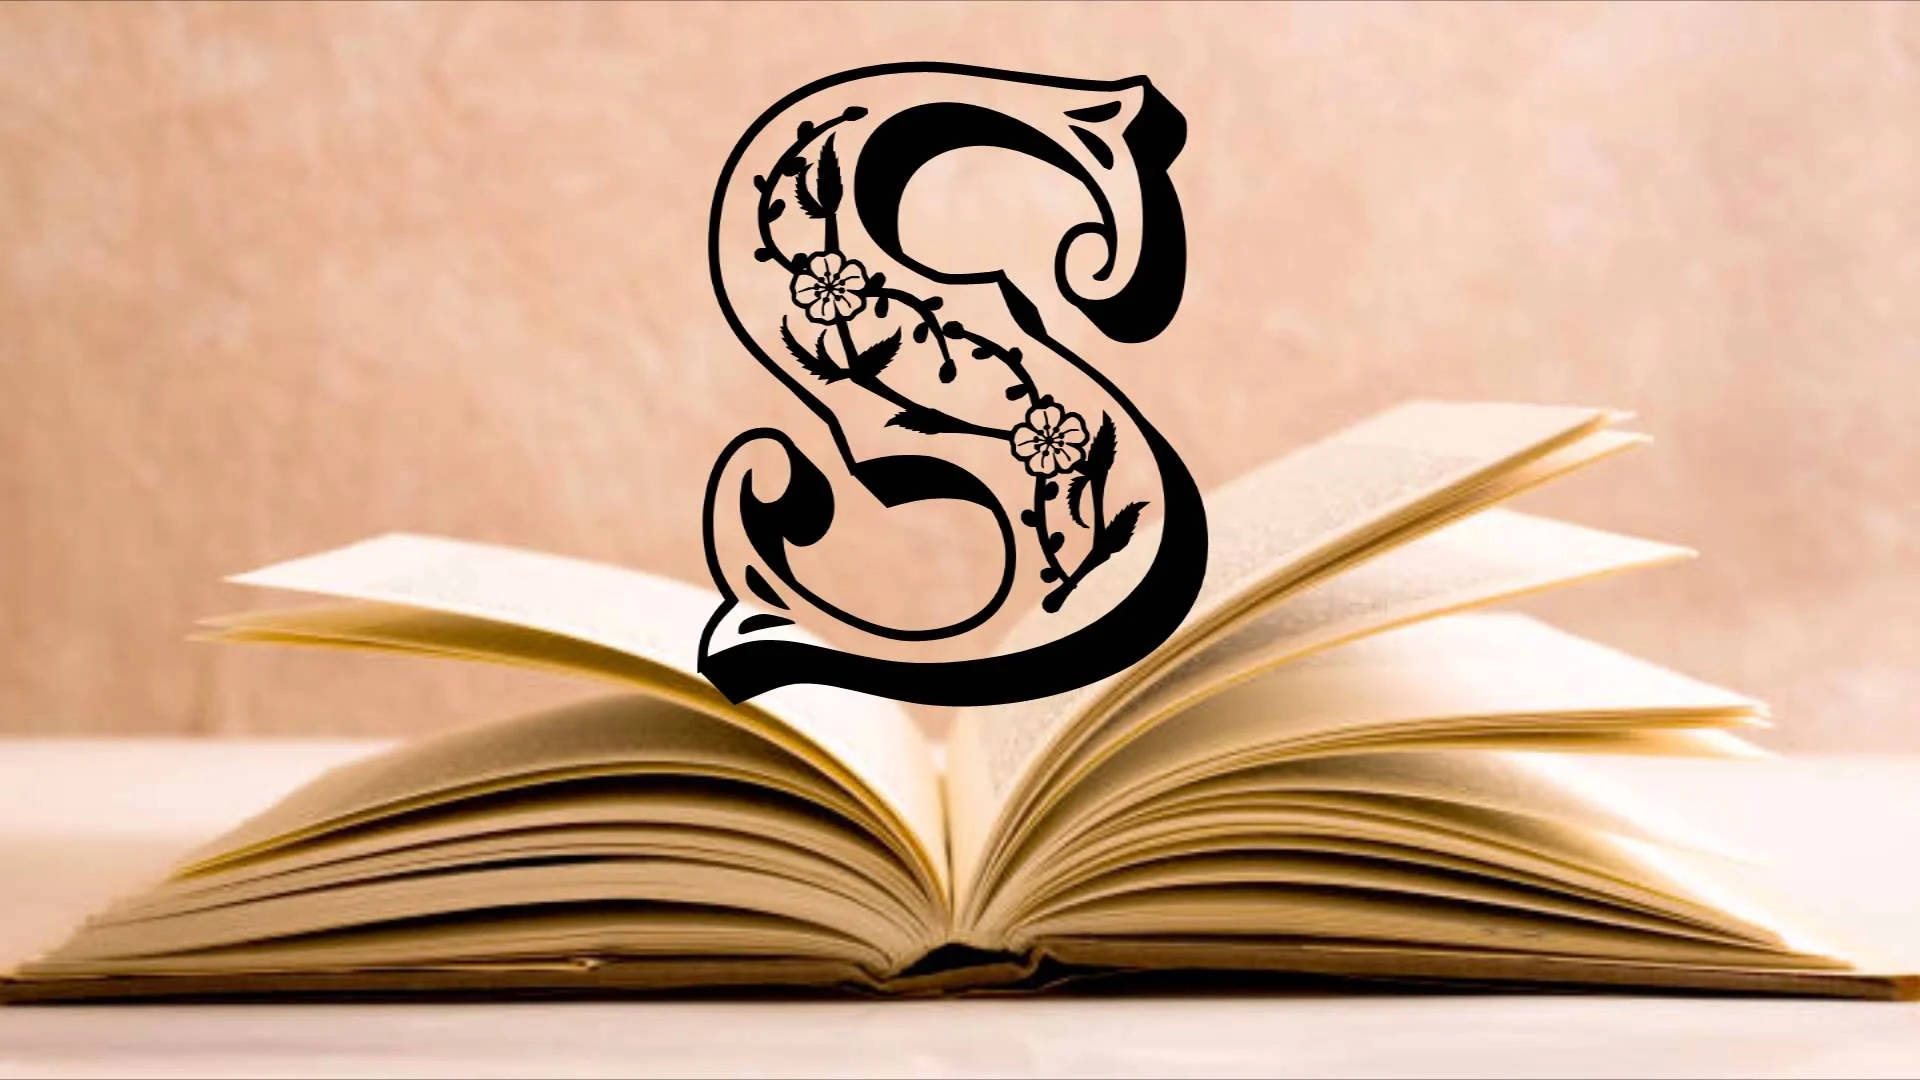 Letter S Over A Book